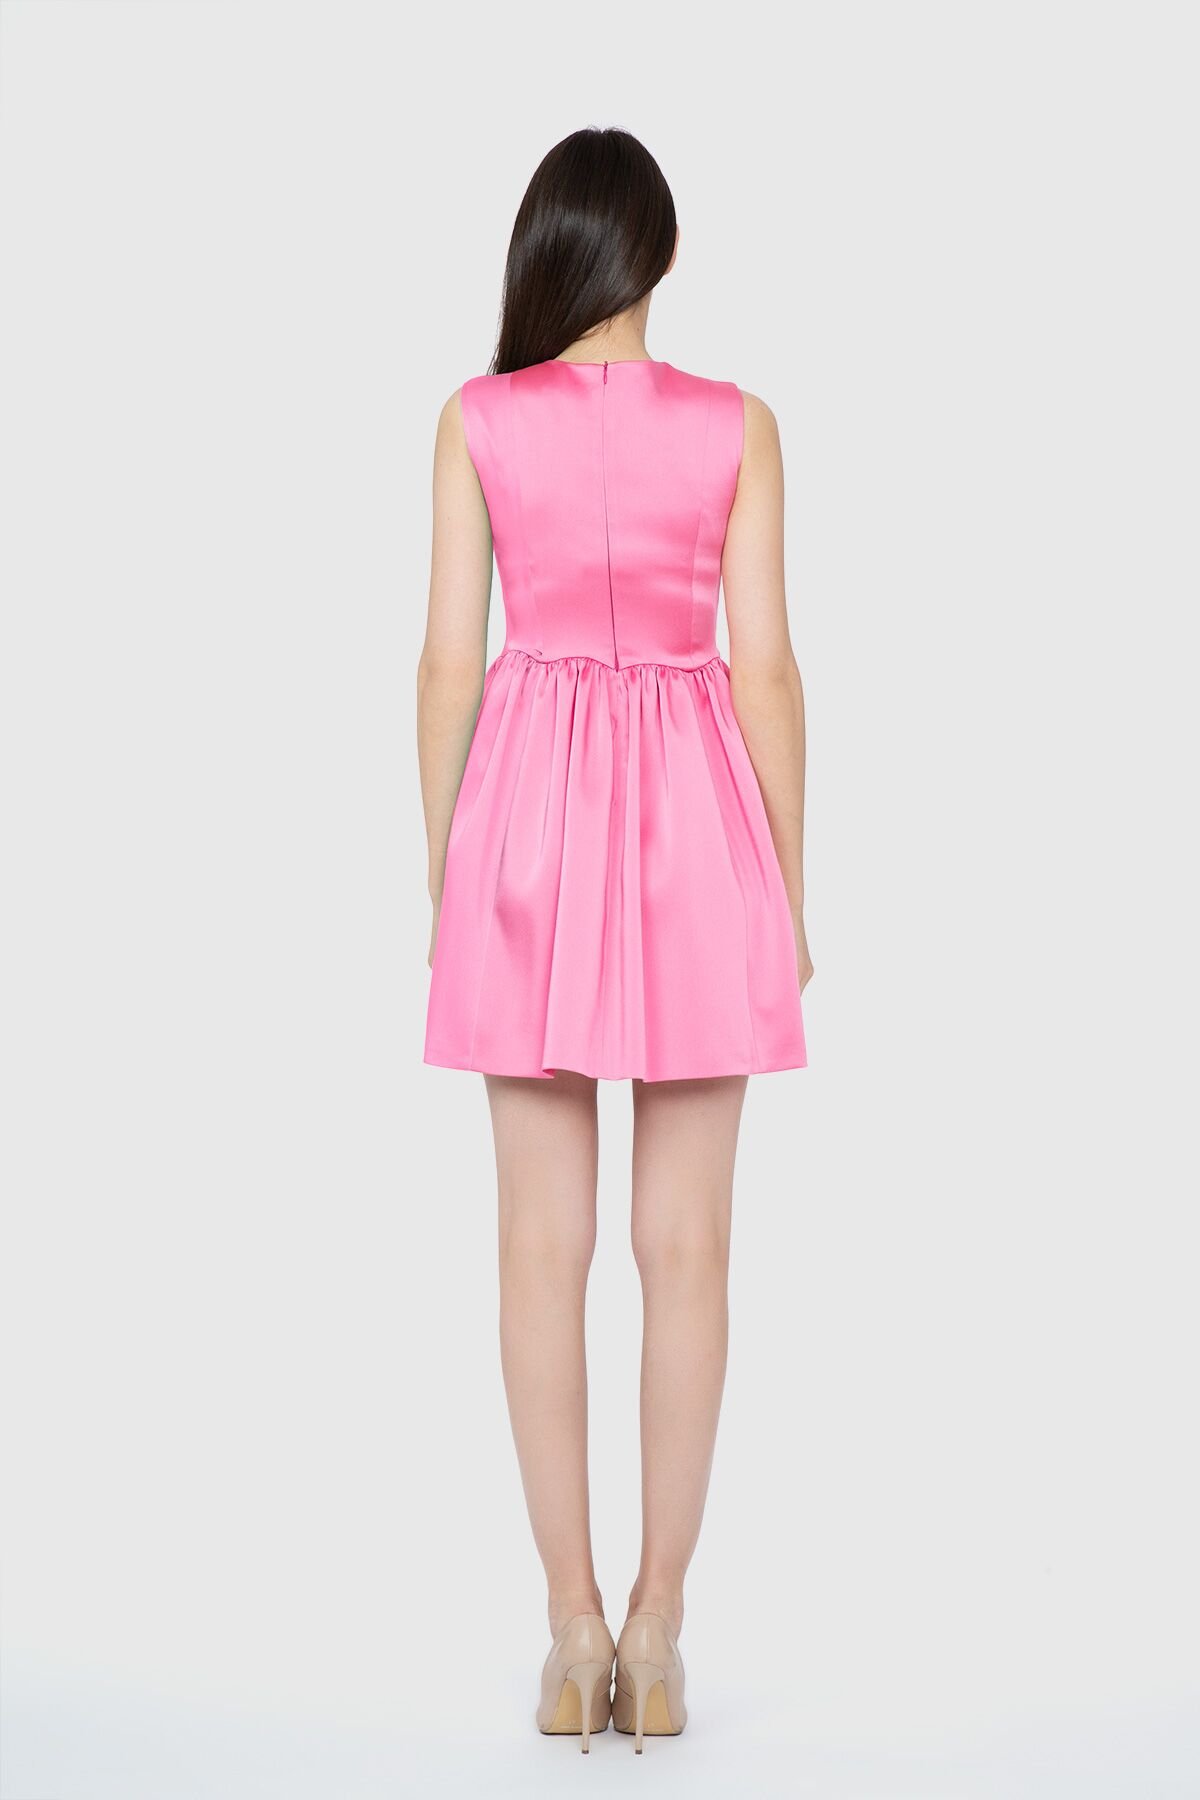 Accessory Detailed Pleated Mini Pink Dress